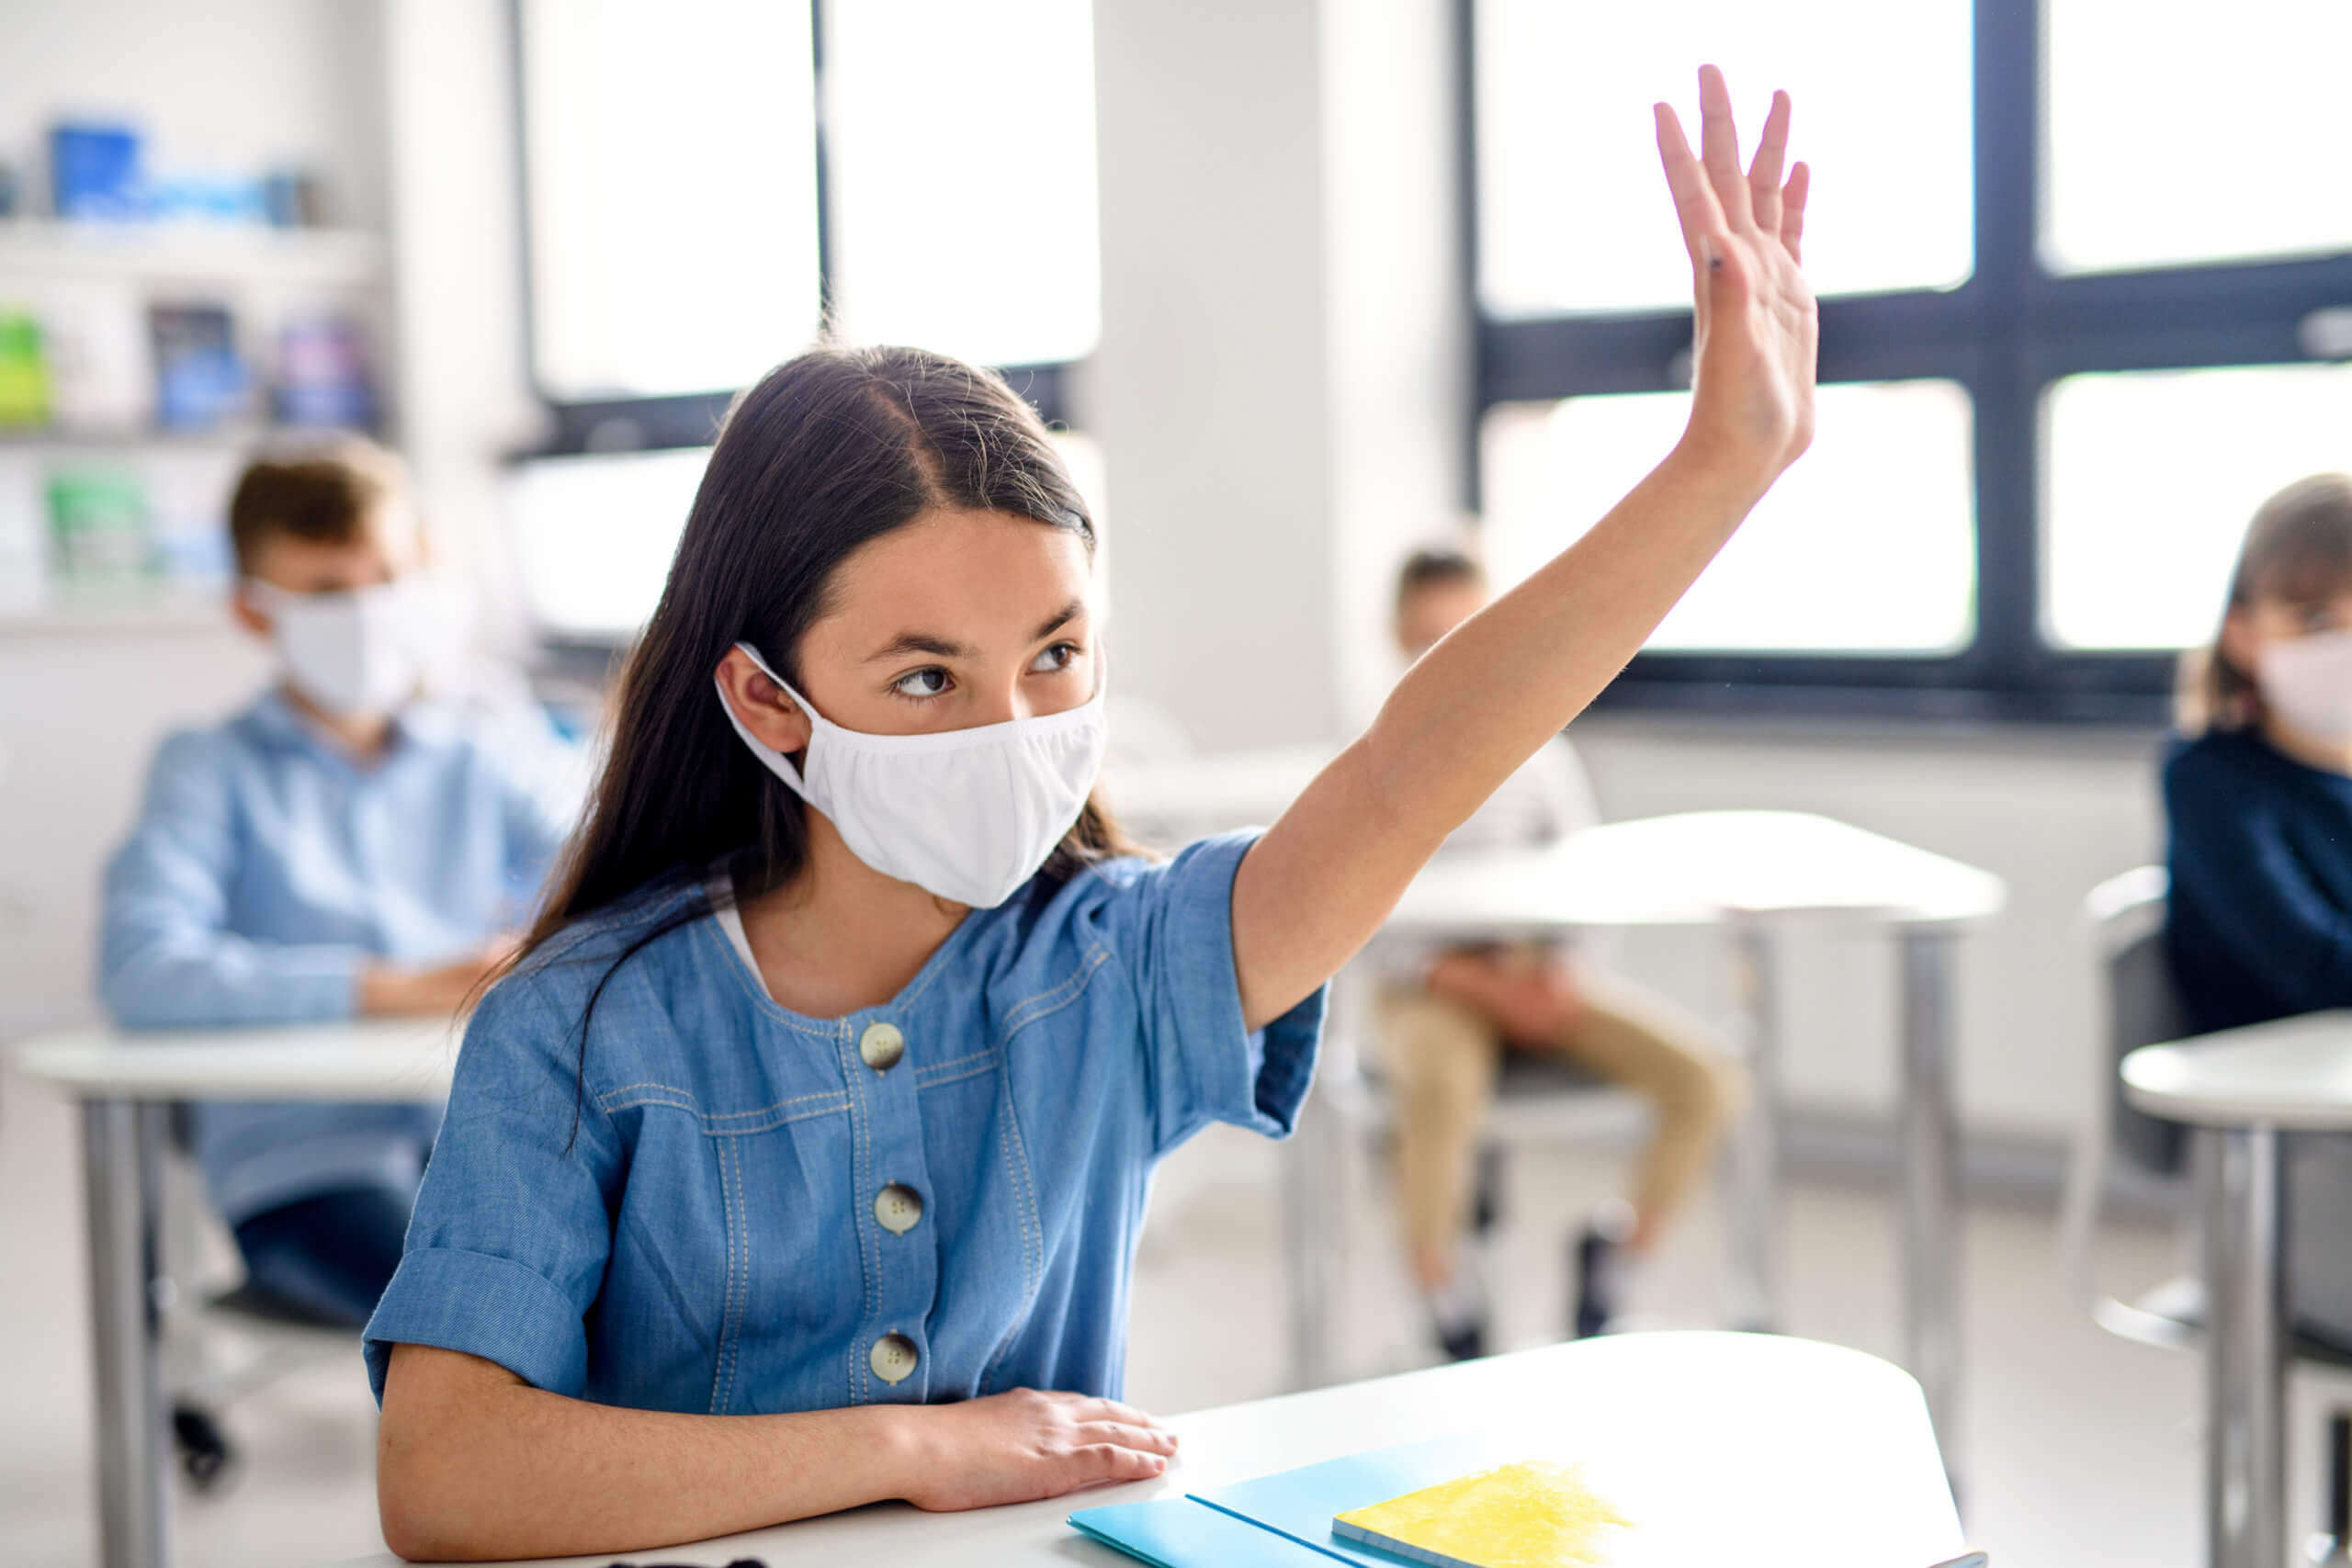 Classroom safety with student wearing mask